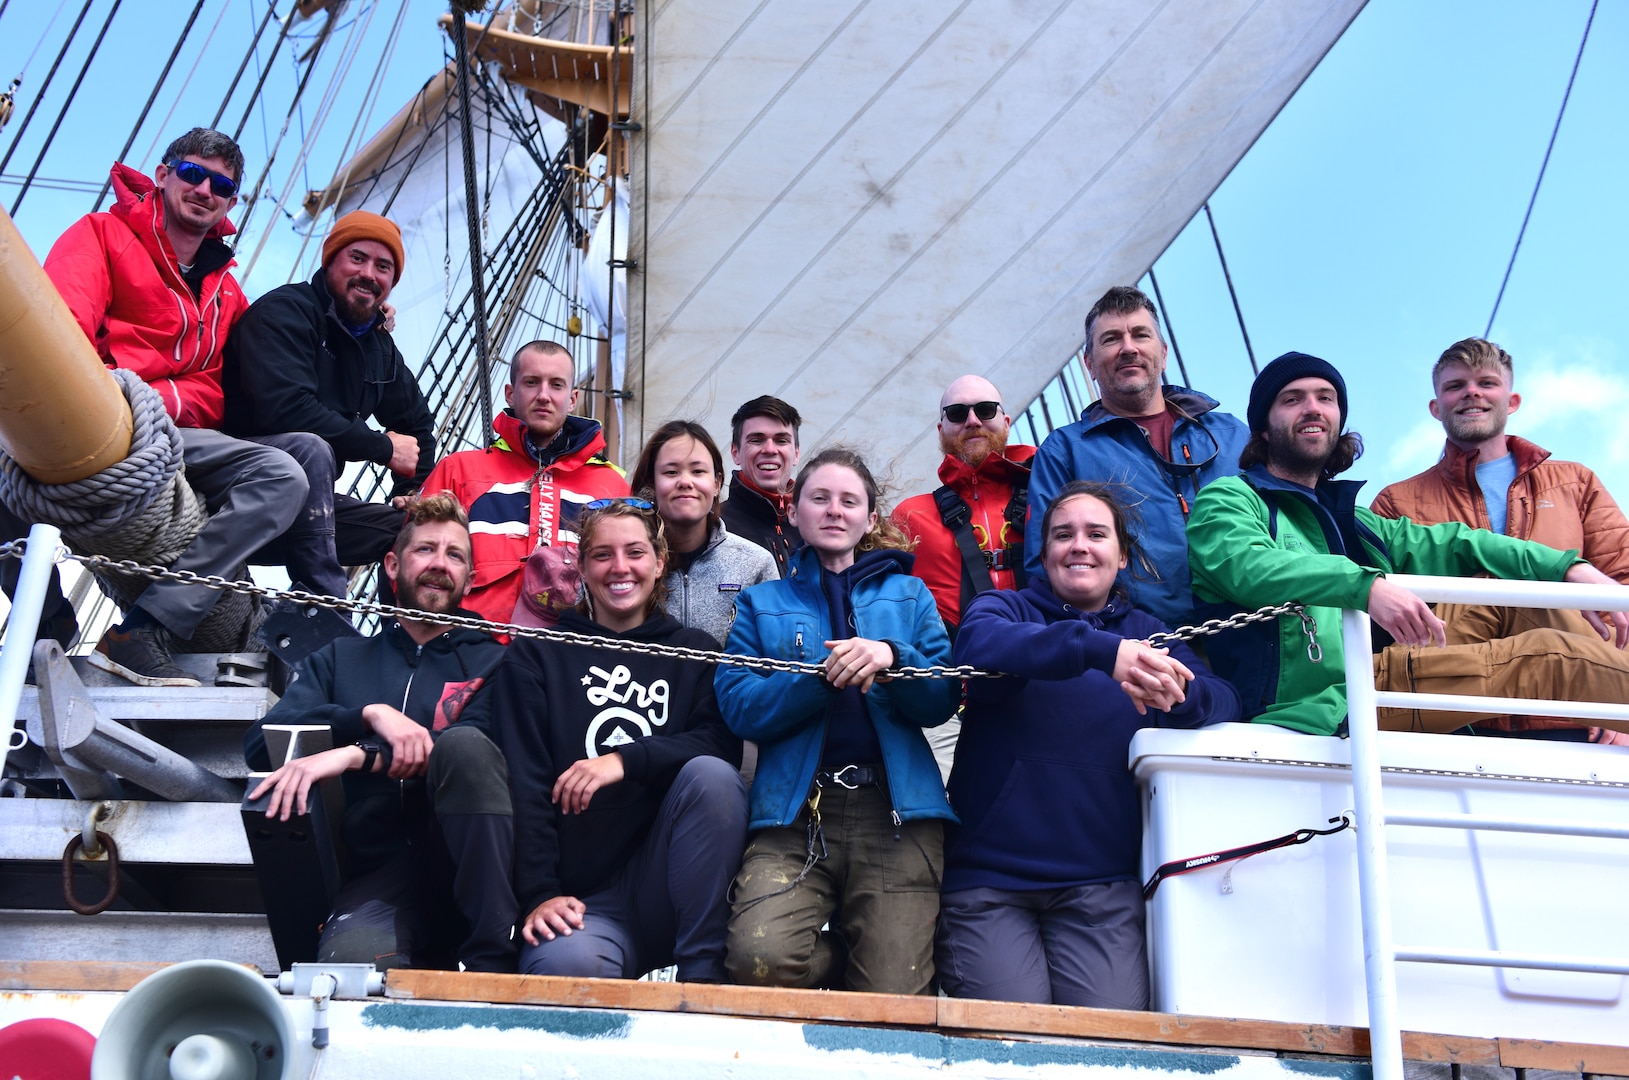 Mariners affiliated with sailing organization Tall Ships America pose for a group photo aboard USCGC Eagle (WIX 327), April 20, 2023, while underway in the Atlantic Ocean; pictured left to right, back row: Darrin Jackson, Ian Beaumont, Jeremy Lawrence, Amanda Weischedel, Kyle May, Andrew Orrison, Geoff Selhorst, James Fitzpatrick, Galen Kane; front row: Matt Thomas, Kaleena Davis, Madison Pulley, and Abby Werner. Eagle conducted a four-month summer deployment, sailing across the Atlantic Ocean, to teach practical seamanship skills to the future leaders of the U.S. Coast Guard, National Oceanic and Atmospheric Administration Corps, foreign military personnel as well as to exchange best practices with Tall Ships America. (U.S. Coast Guard photo by Petty Officer 2nd Class Brandon Hillard)